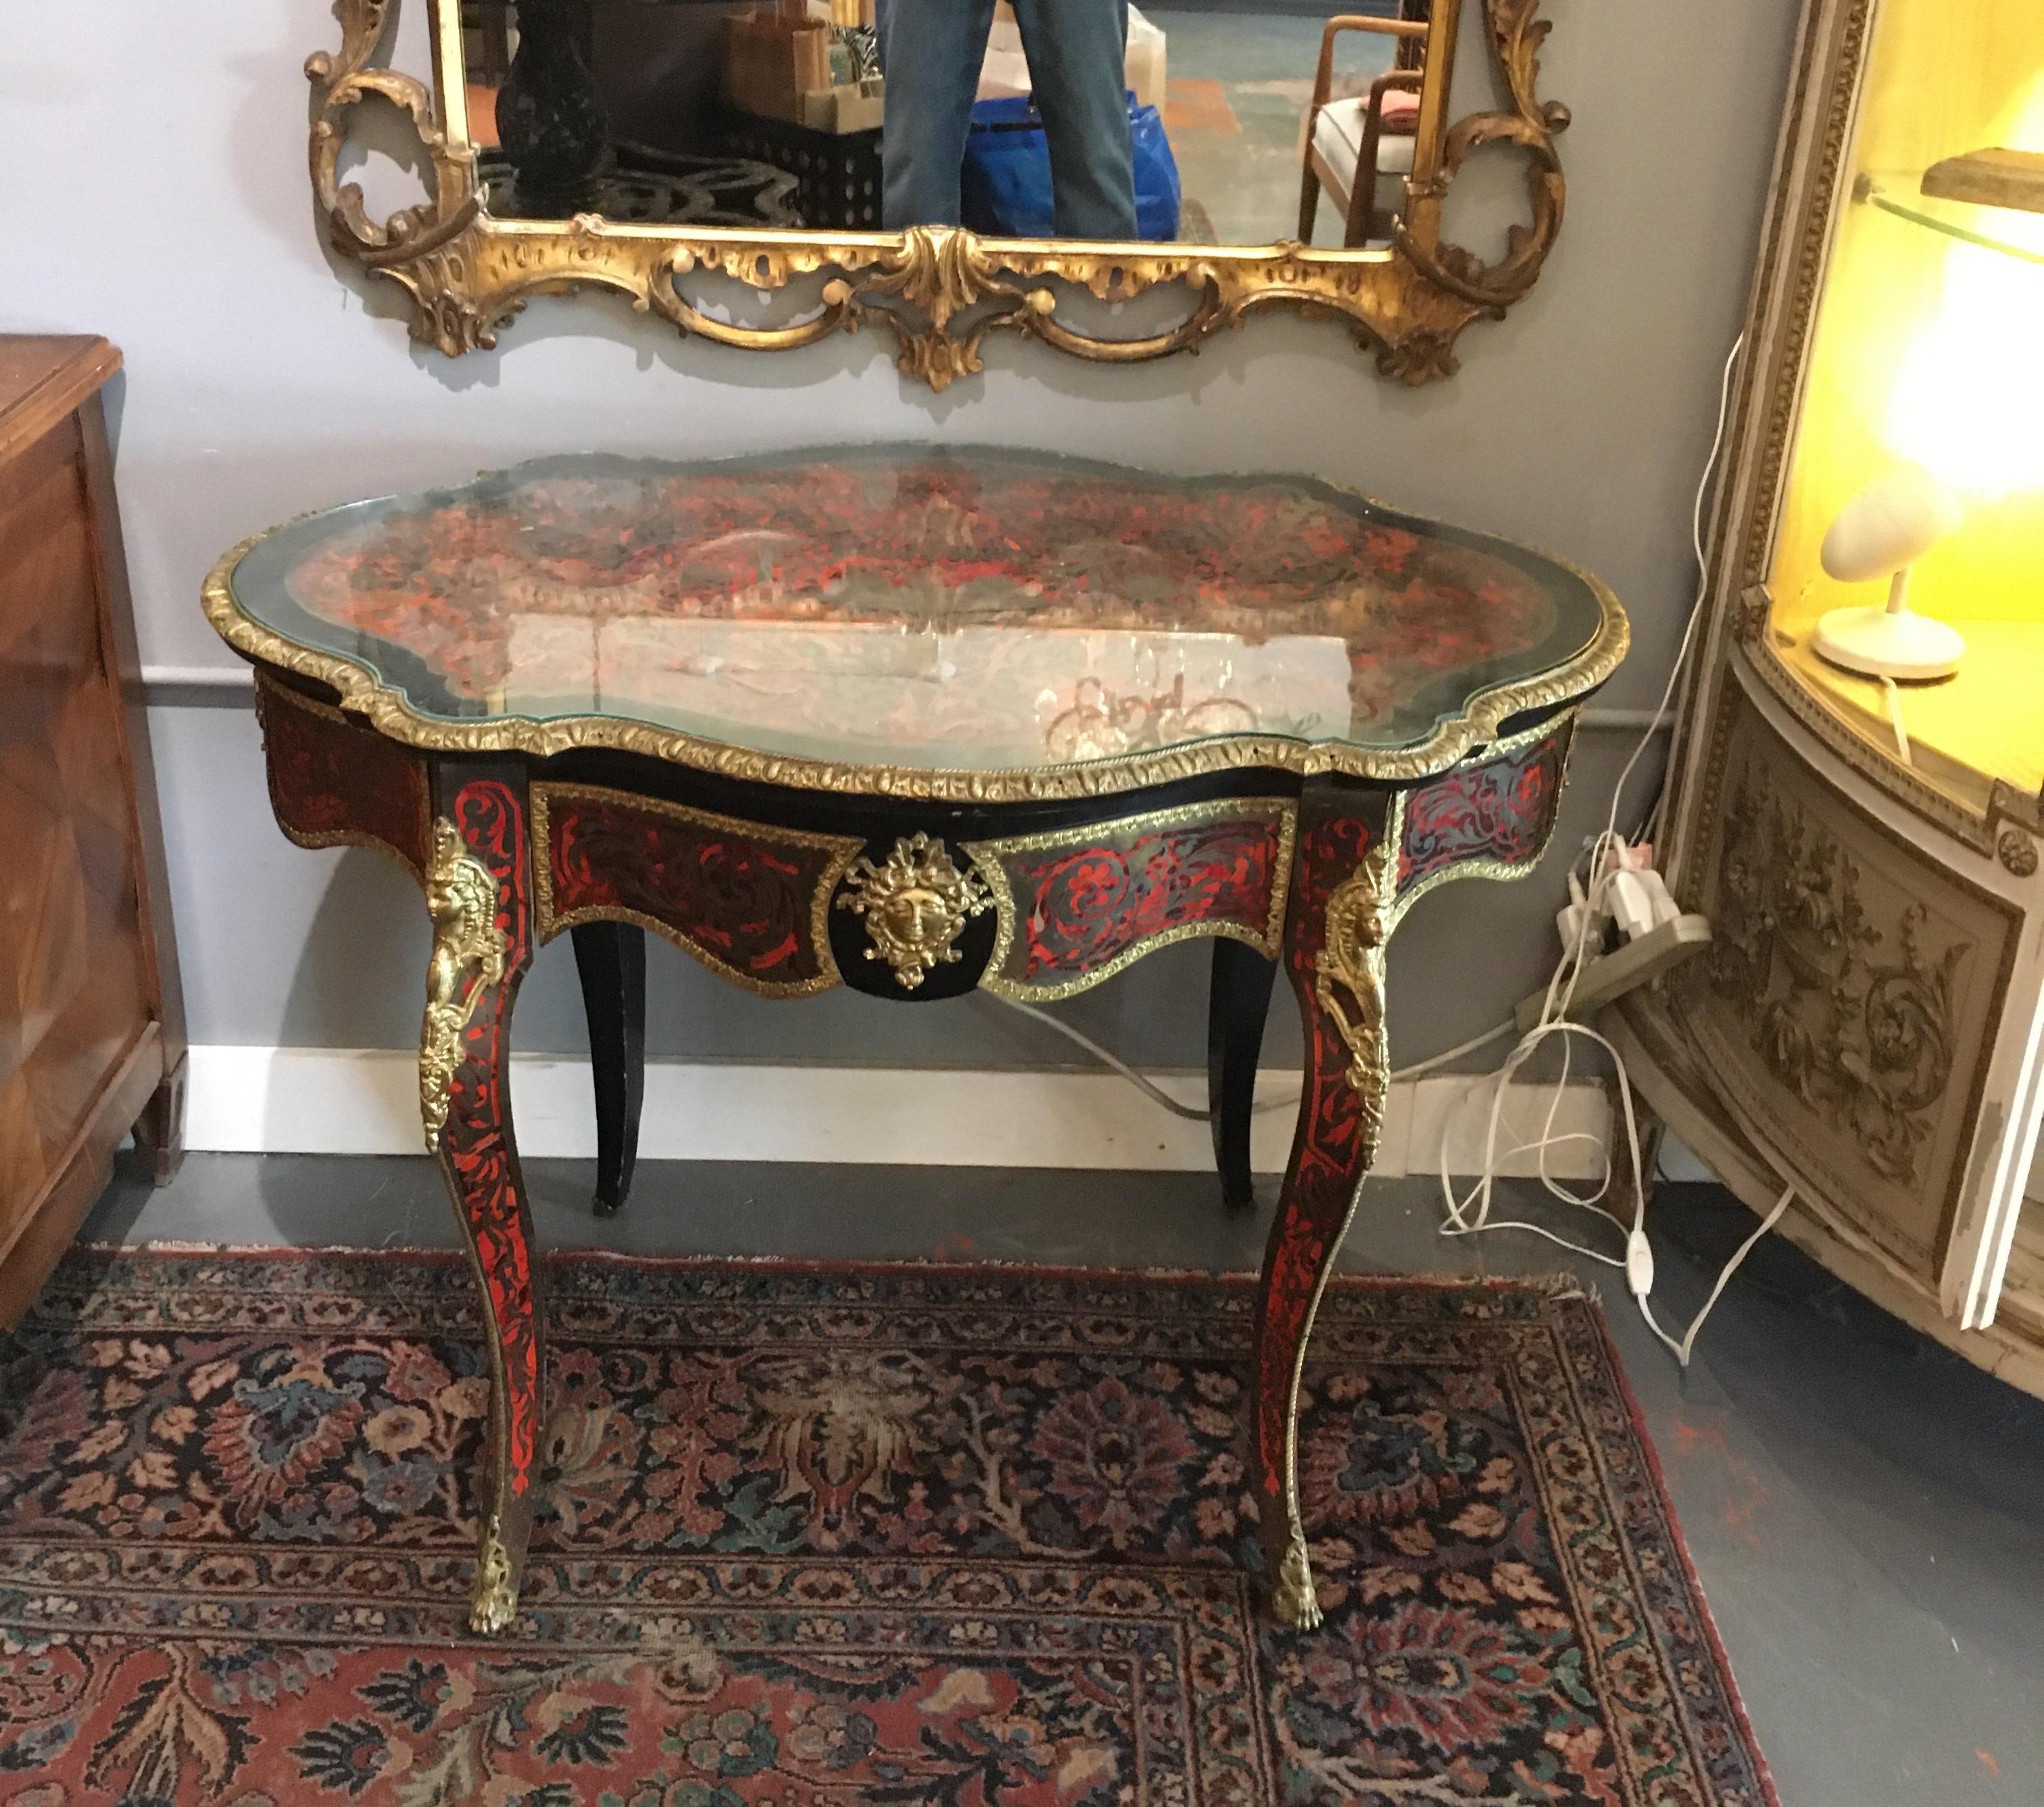 Lovely early 20th century inlaid Boulle serpentine shaped center table with gilded ormolu mounts on all sides. One drawer, raised on cabriole legs with ormolu mounts. Custom cut glass top follows serpentine shape.